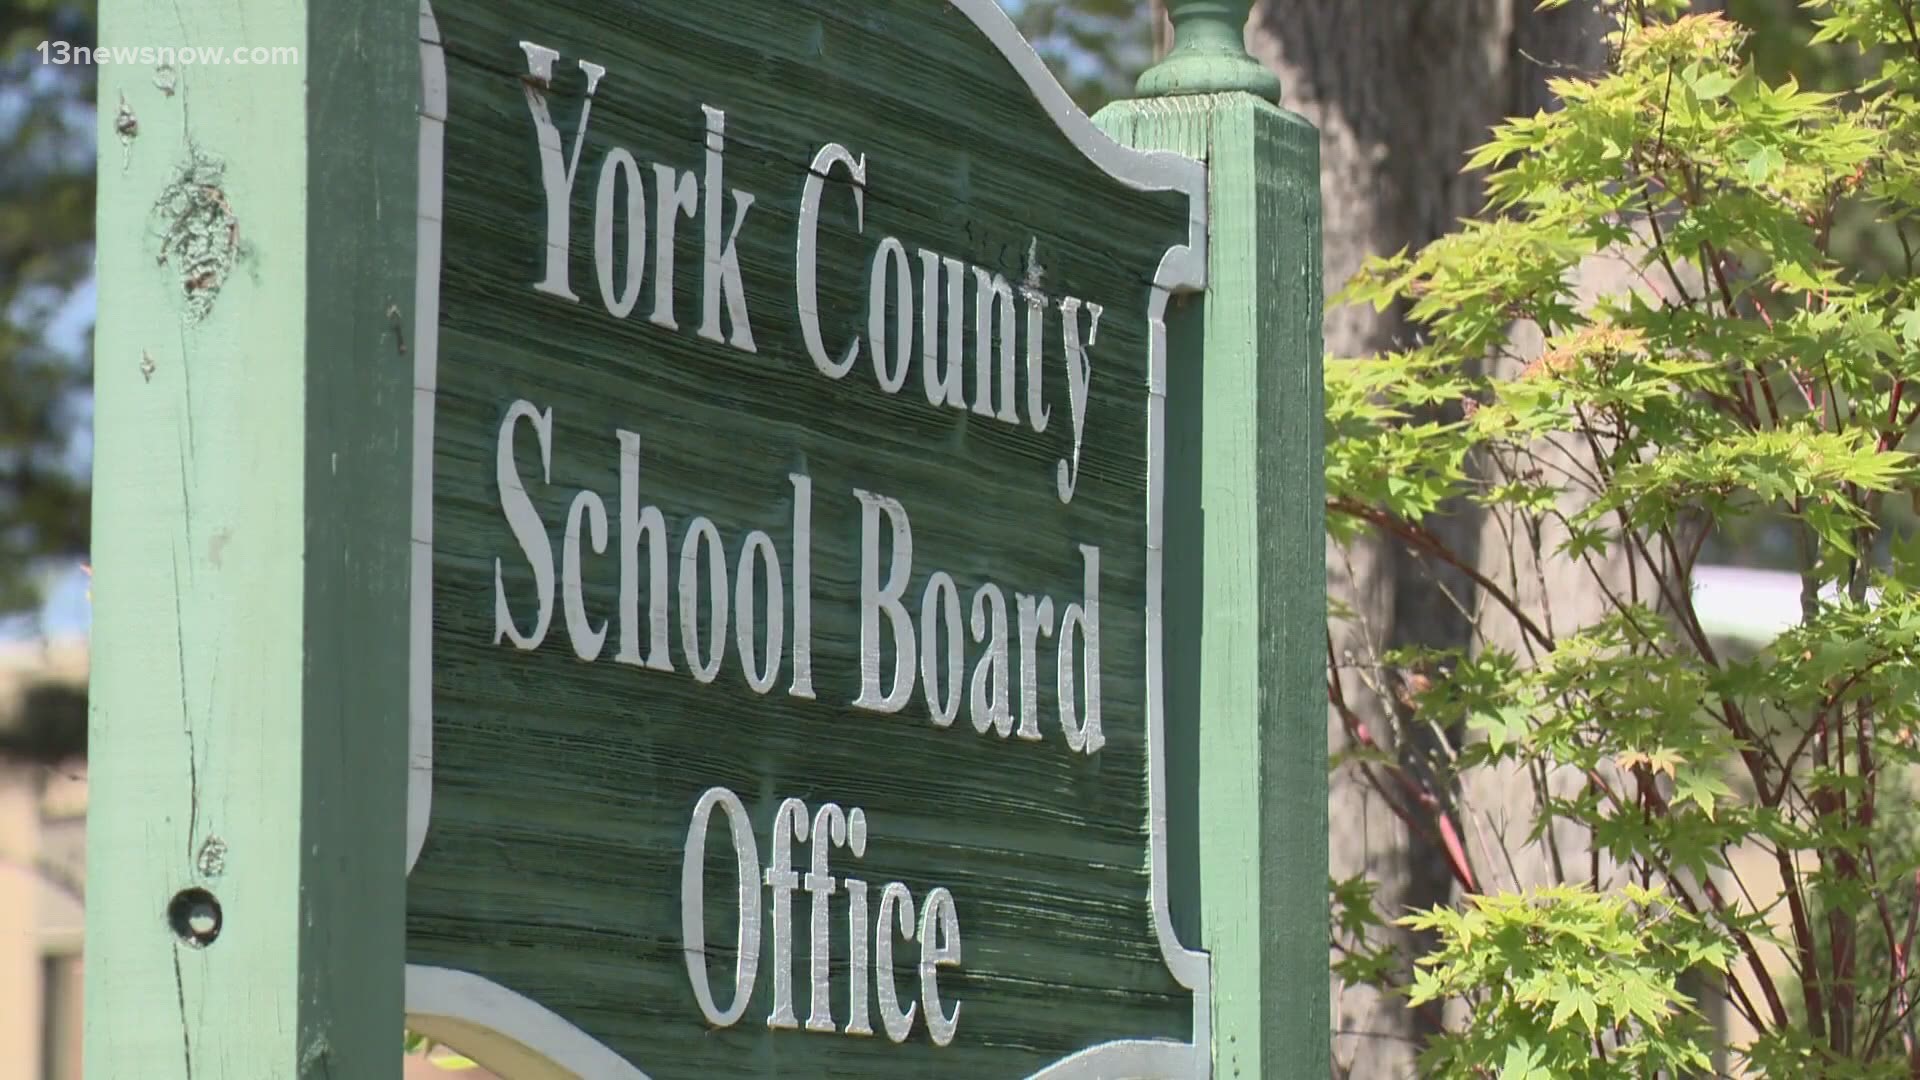 Some special education programs are set to resume at York County's elementary schools. Administrators hope to bring pre-K through third graders back soon.